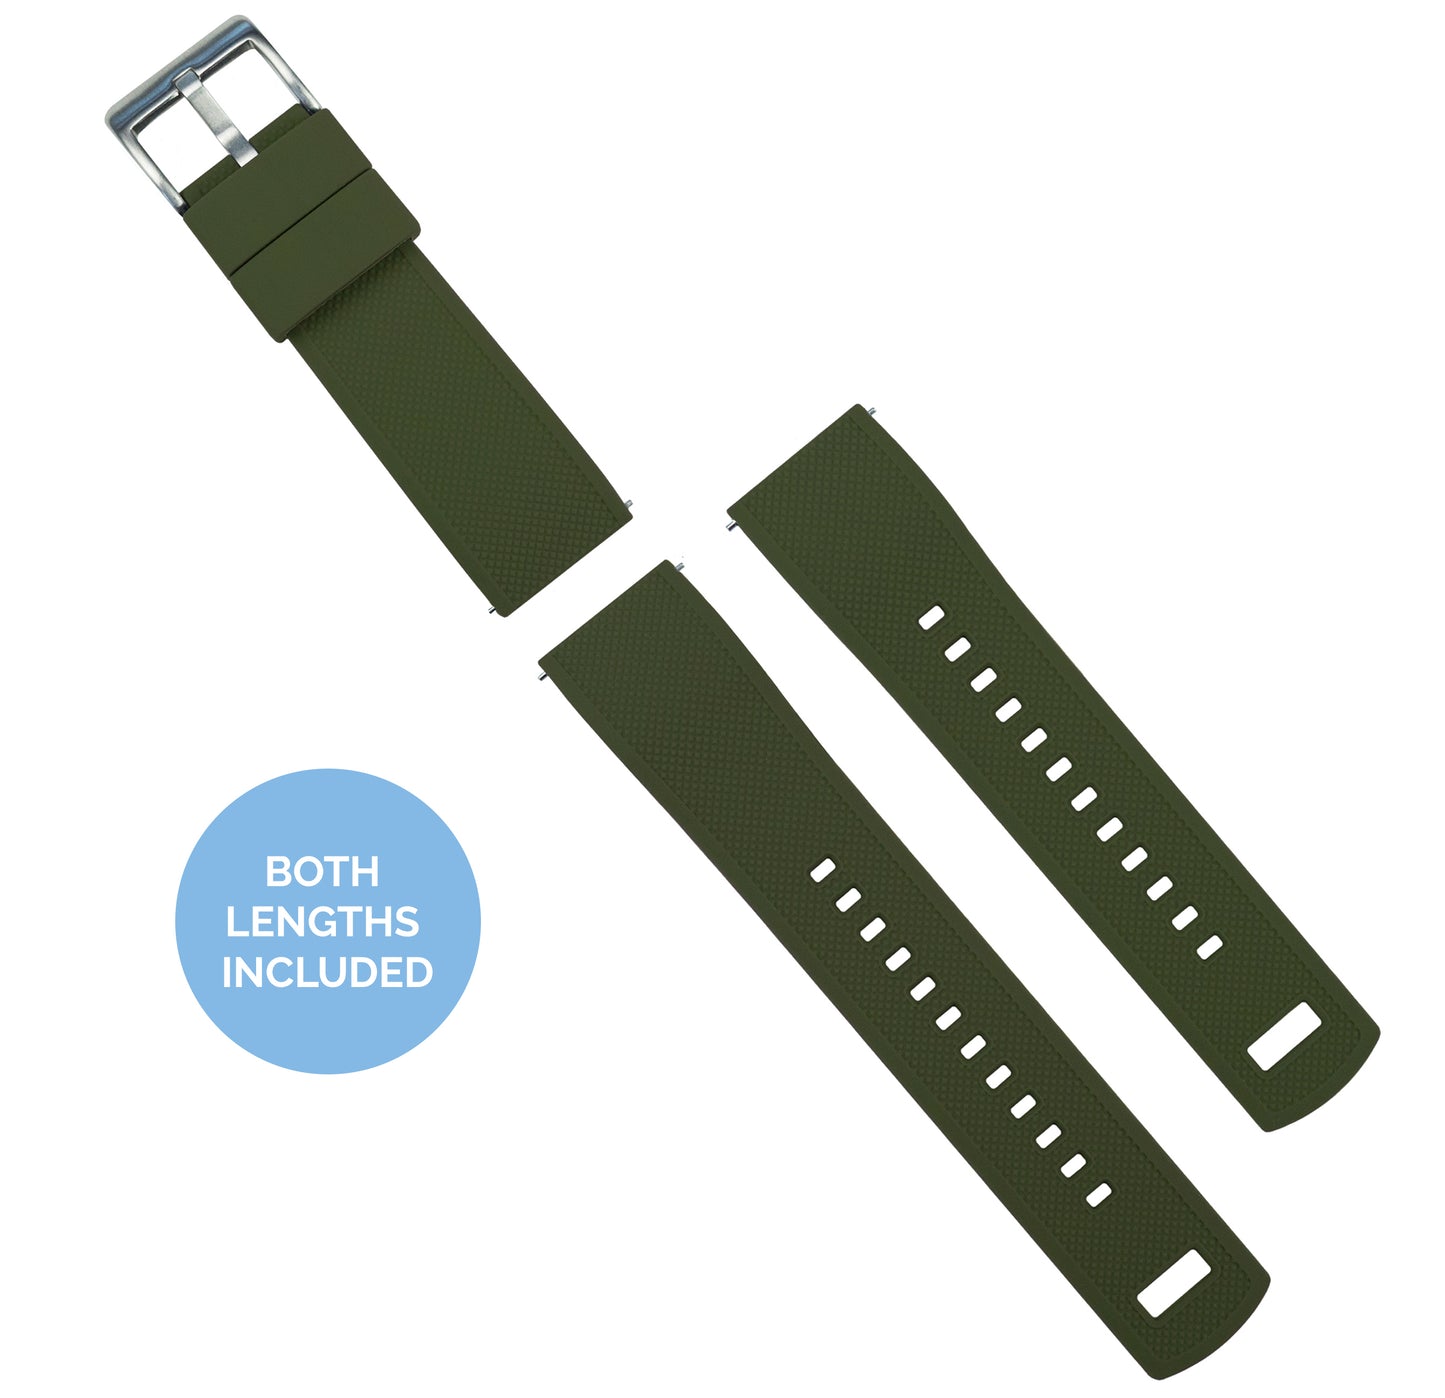 Timex Weekender Expedition Watches Elite Silicone Army Green Top Black Bottom Watch Band